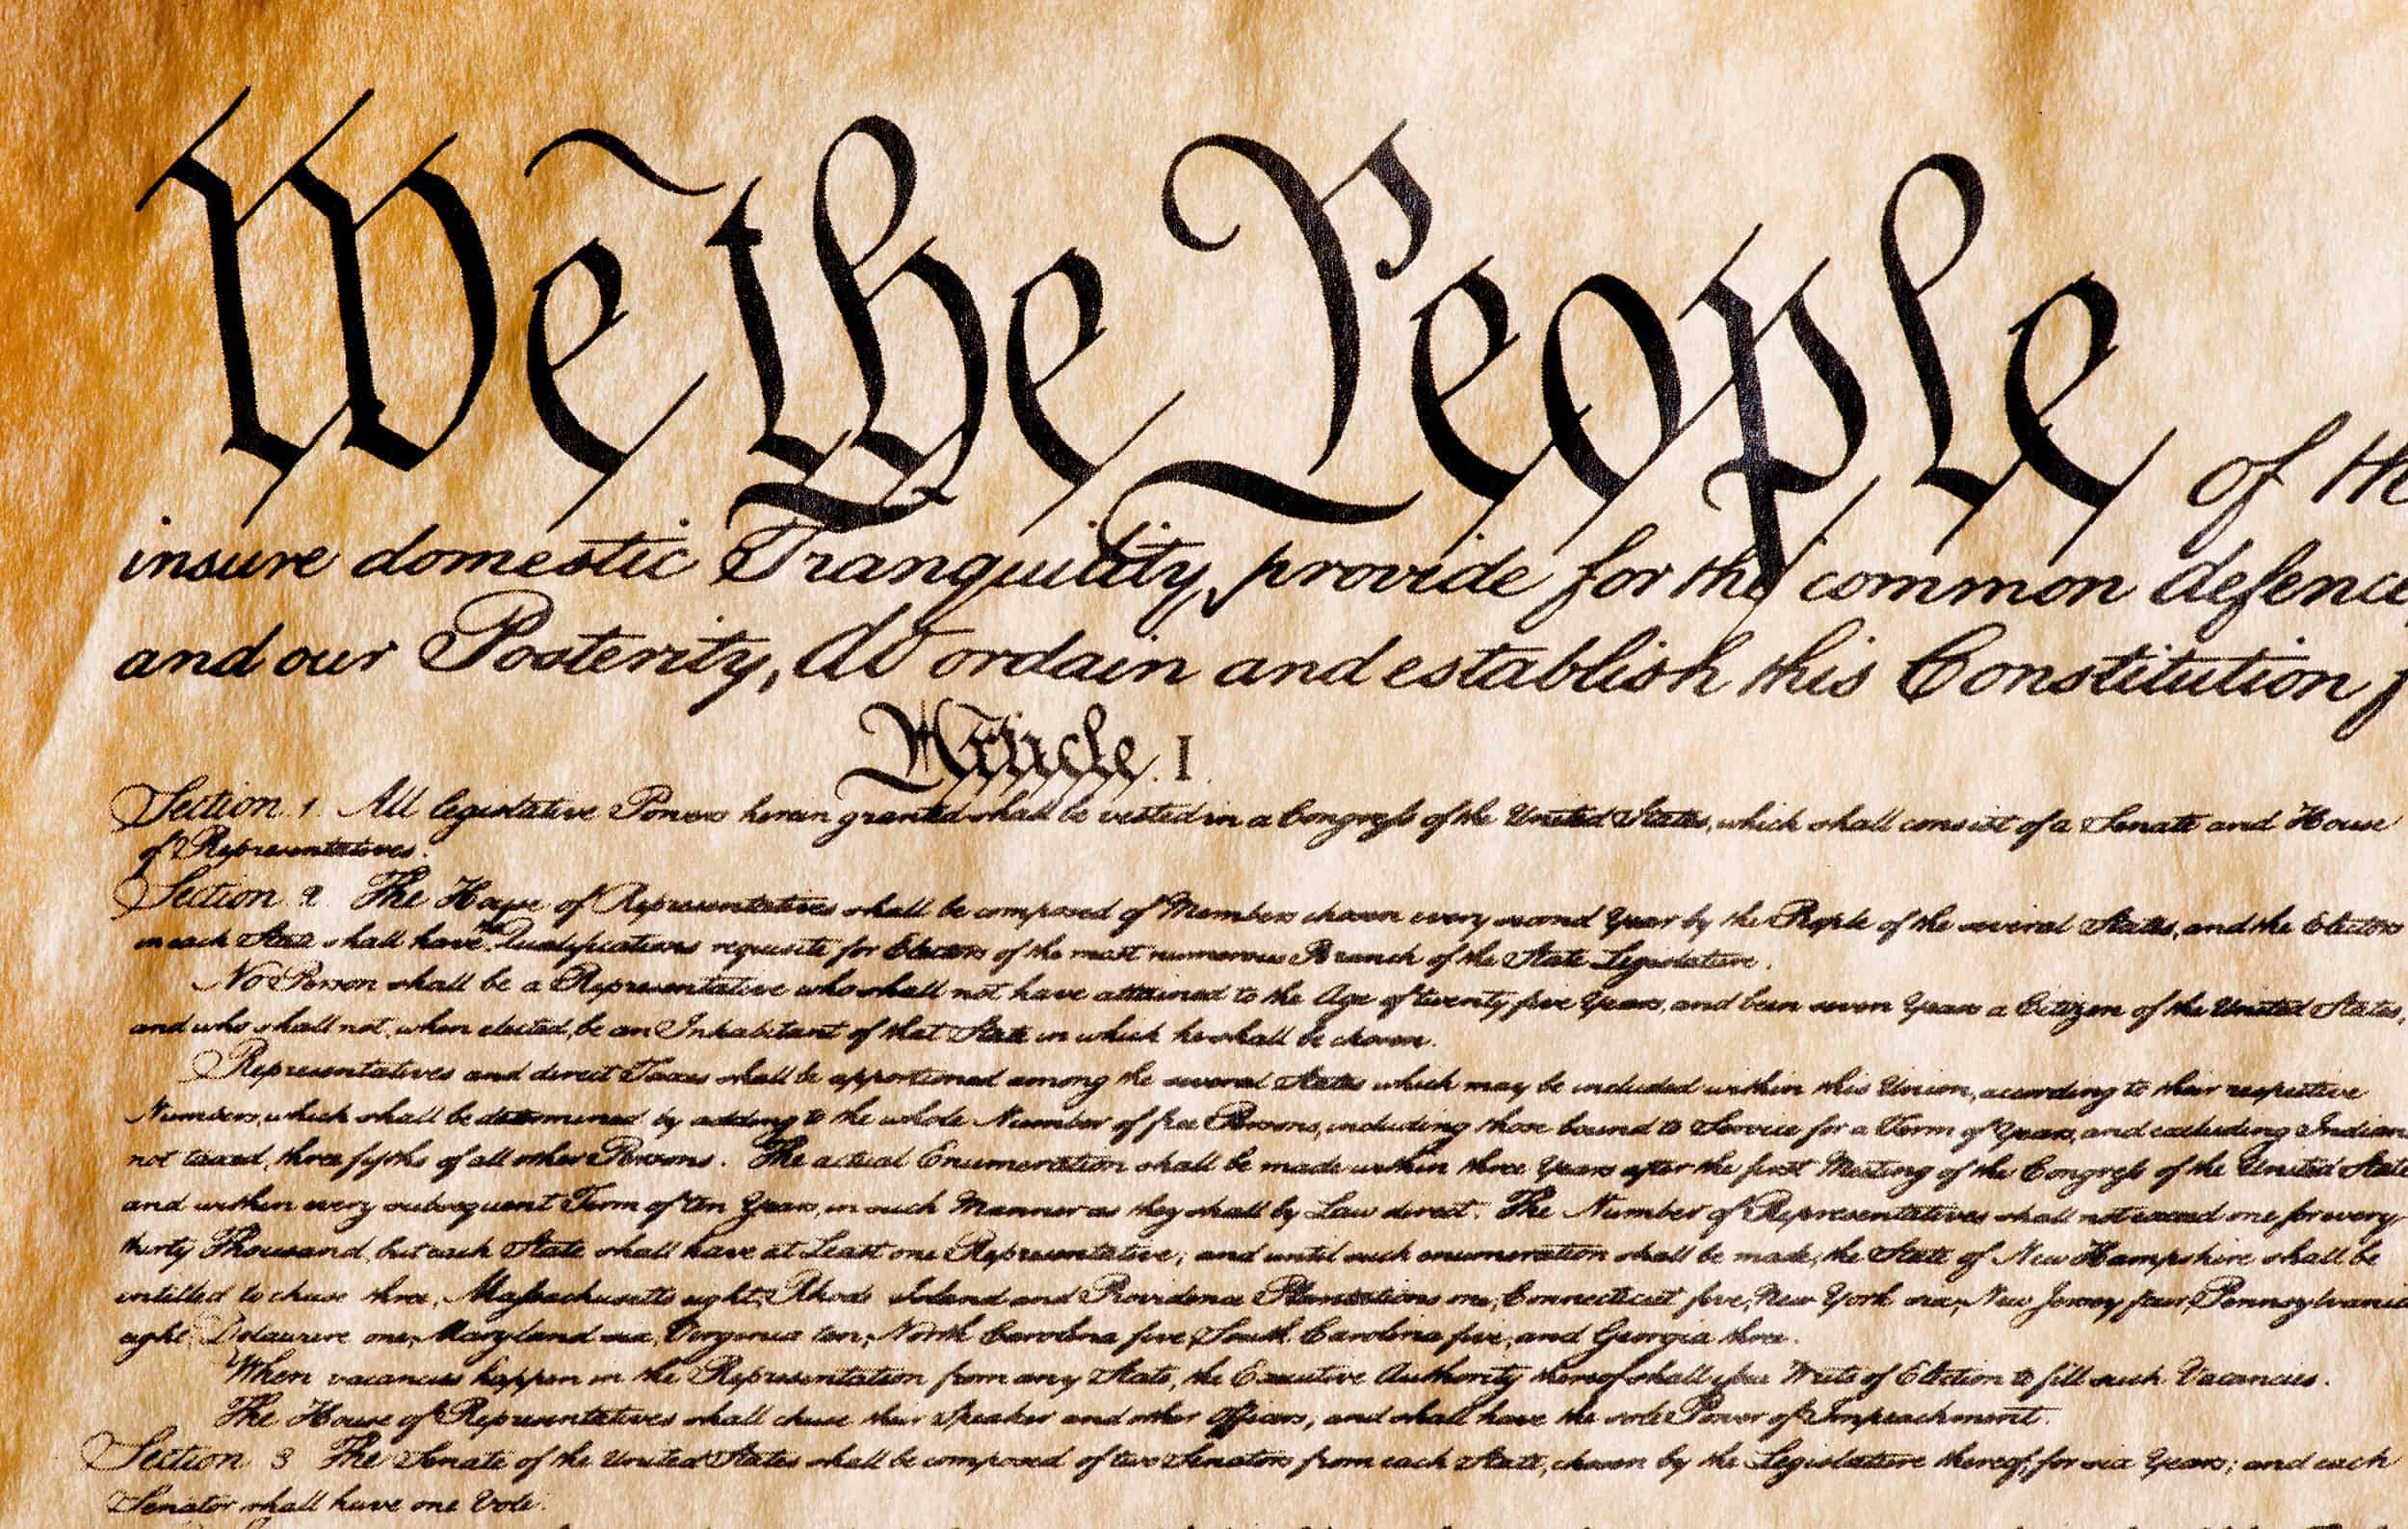 Does the U.S. Constitution Guarantee A Right To Life?